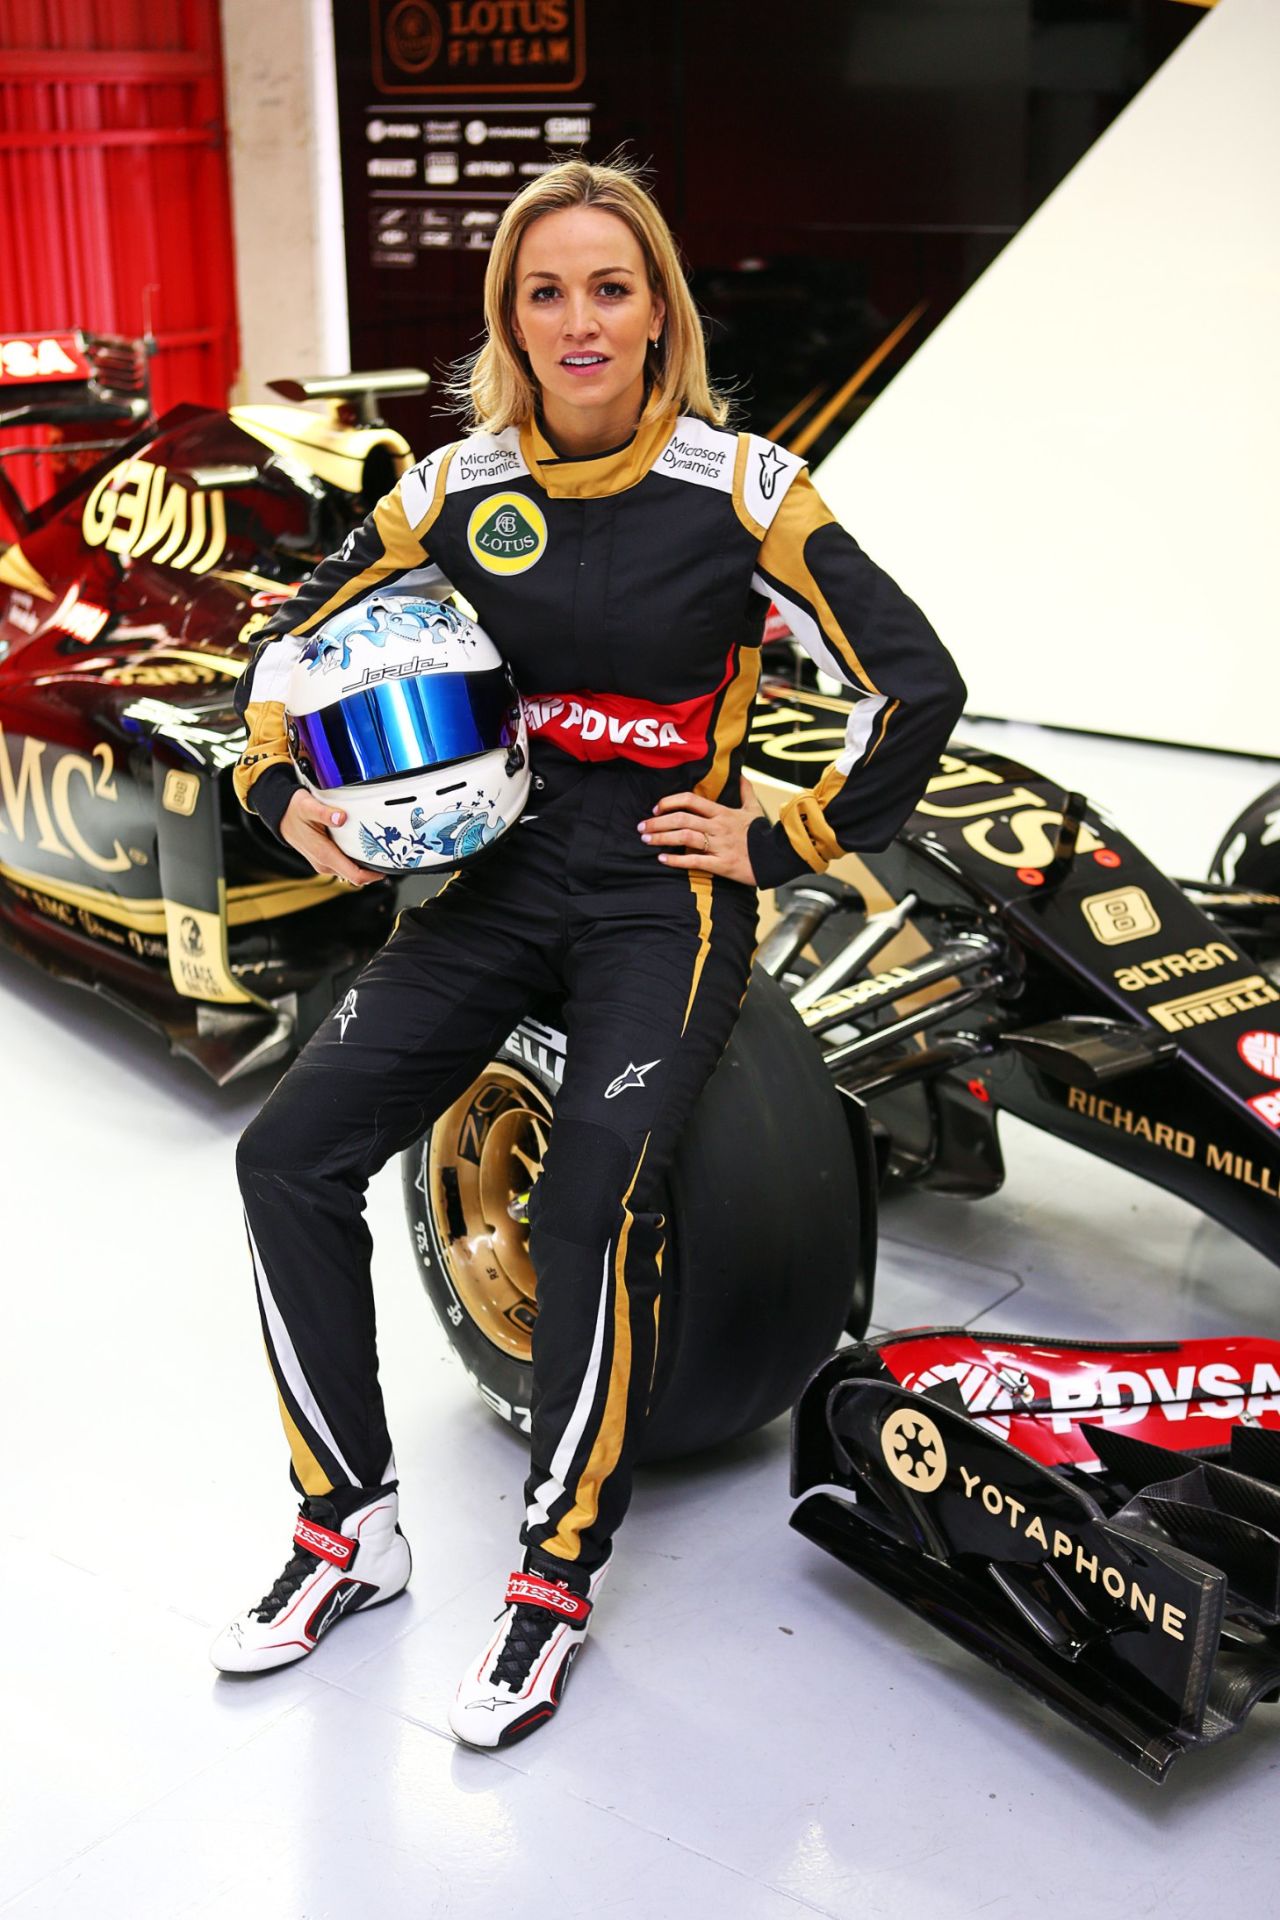 The 26-year-old works on an intensive simulator program at Lotus' base in Enstone, England.